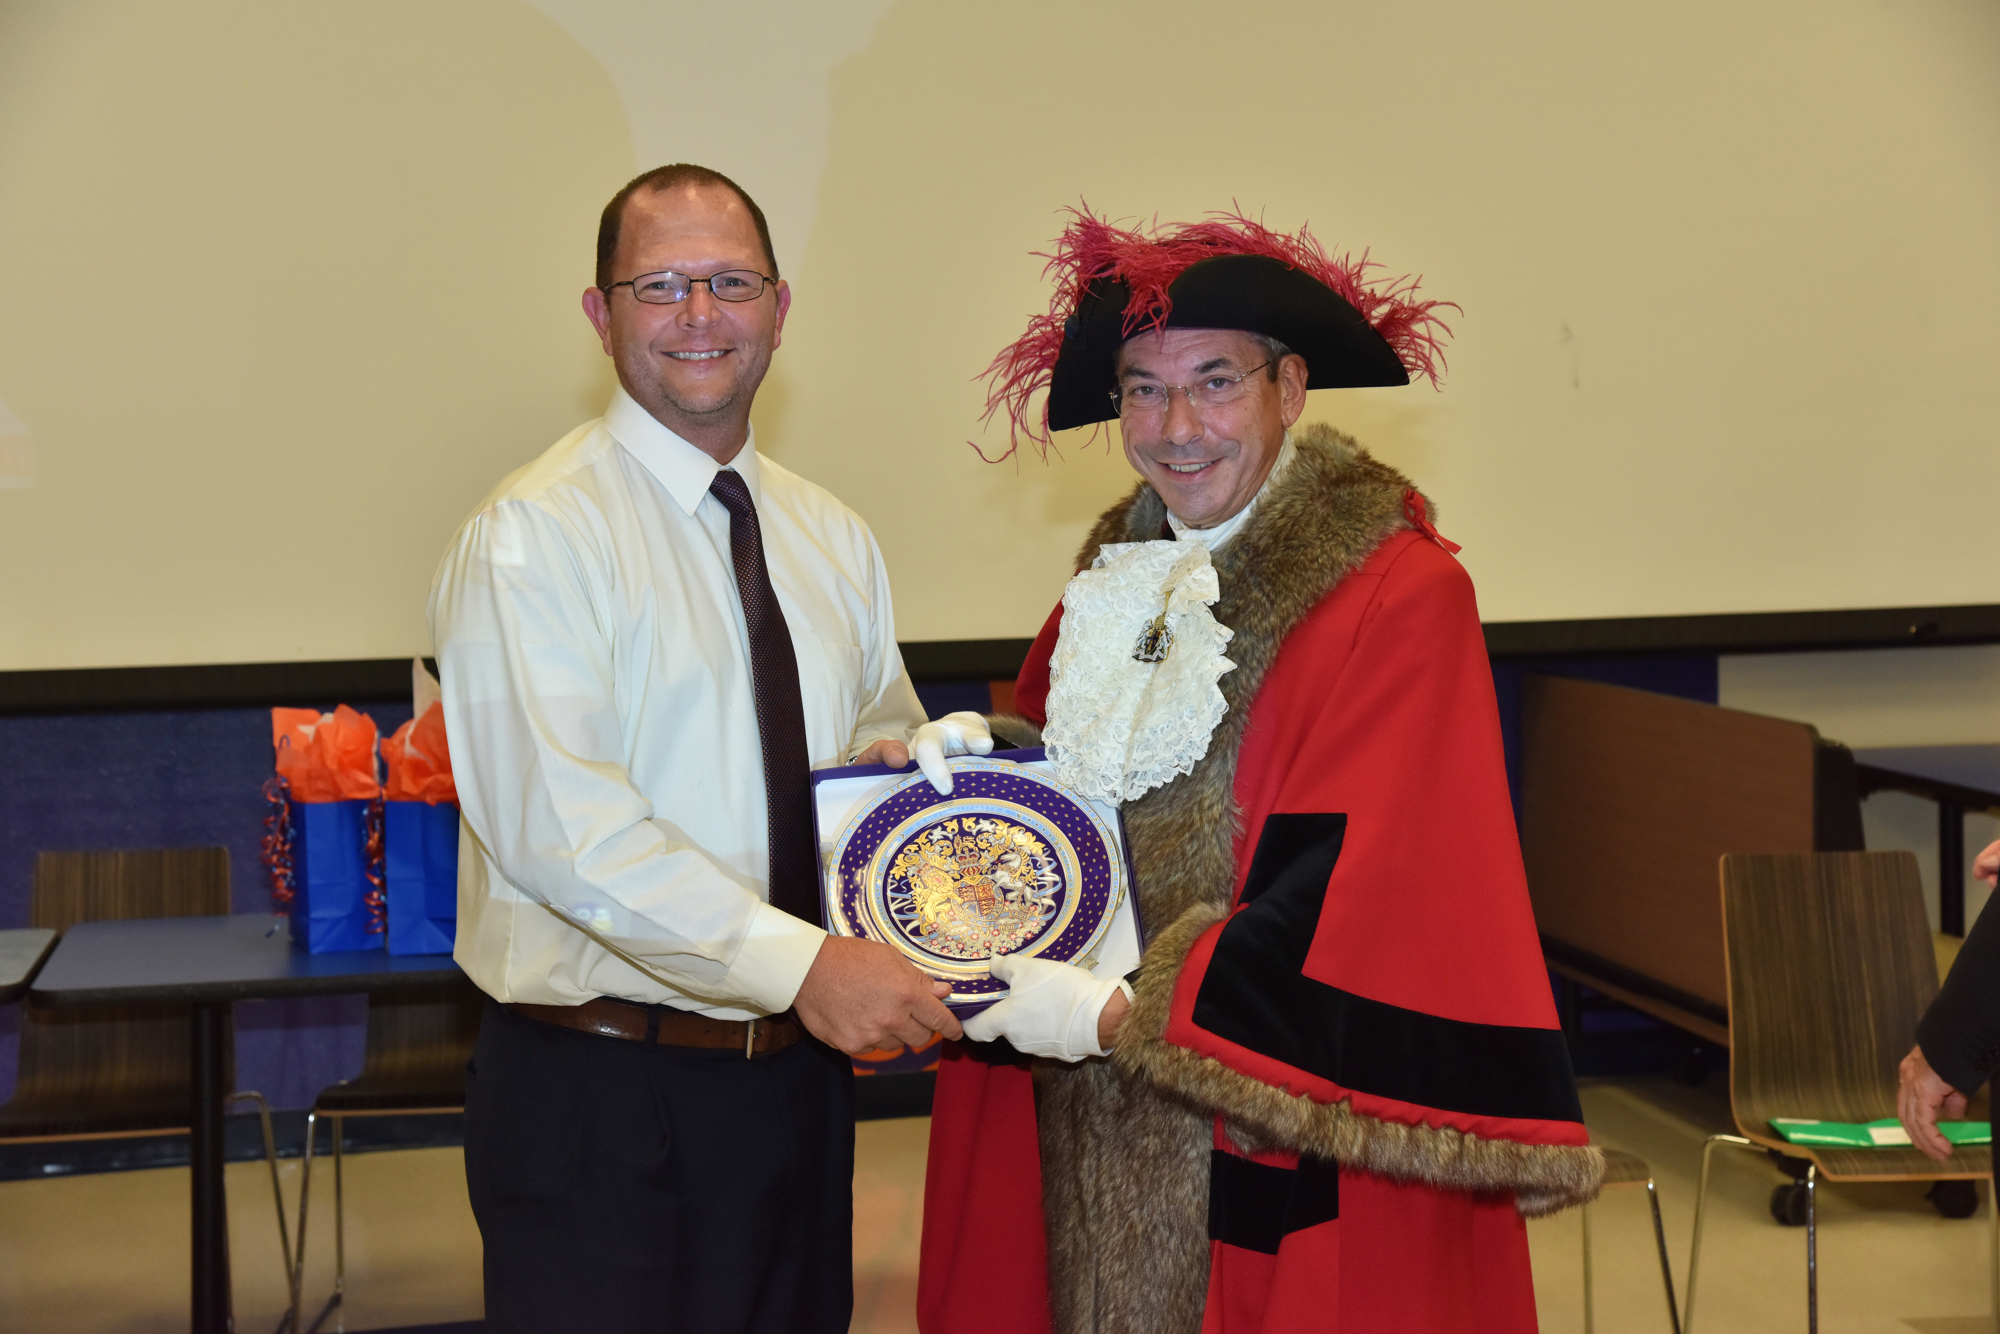 Band director Kenneth Boyd accepts a gift from the British dignitary. Photo by Thomas Lightbody